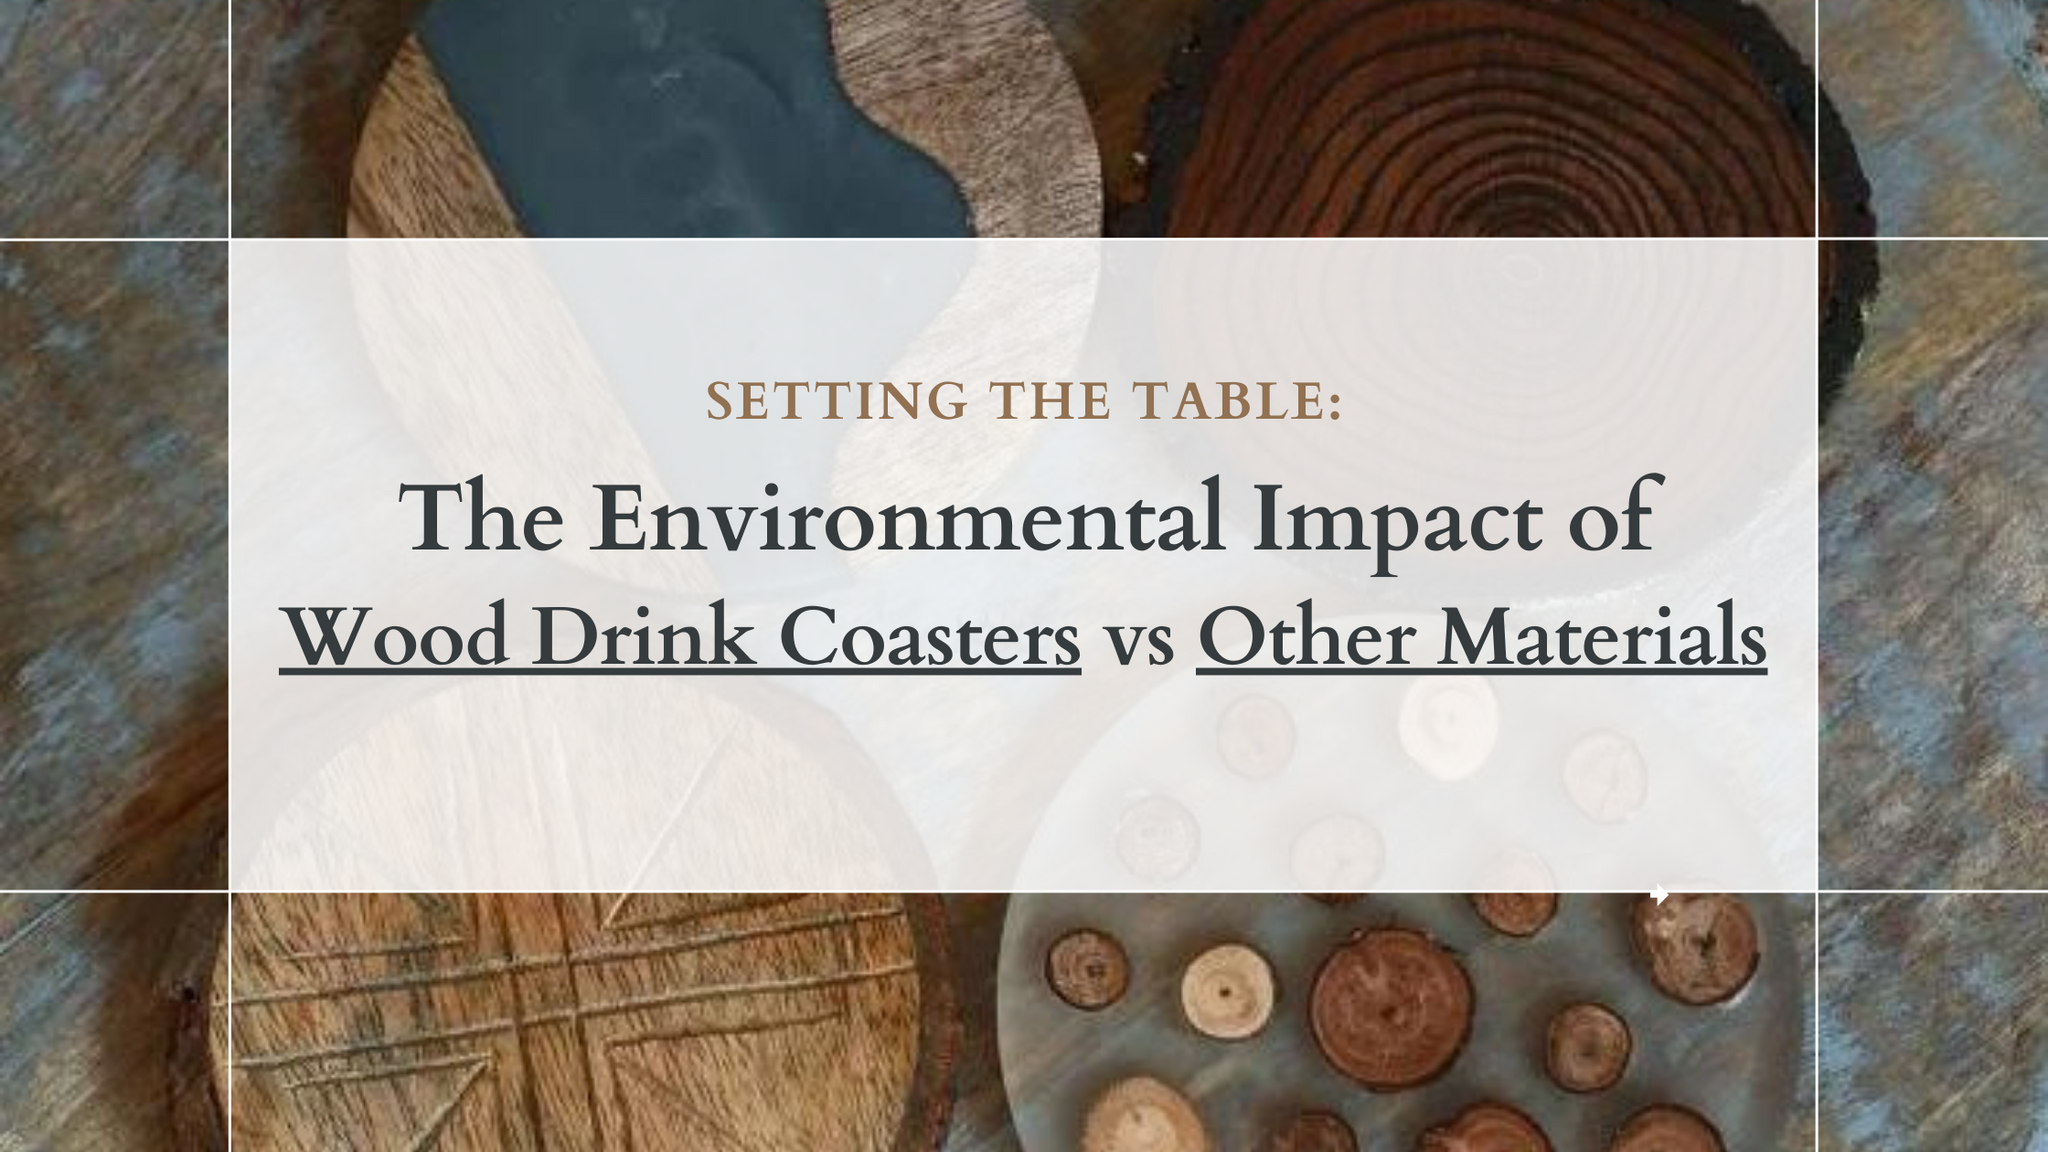 Setting the Table: The Environmental Impact of Wood Drink Coasters vs Other Materials